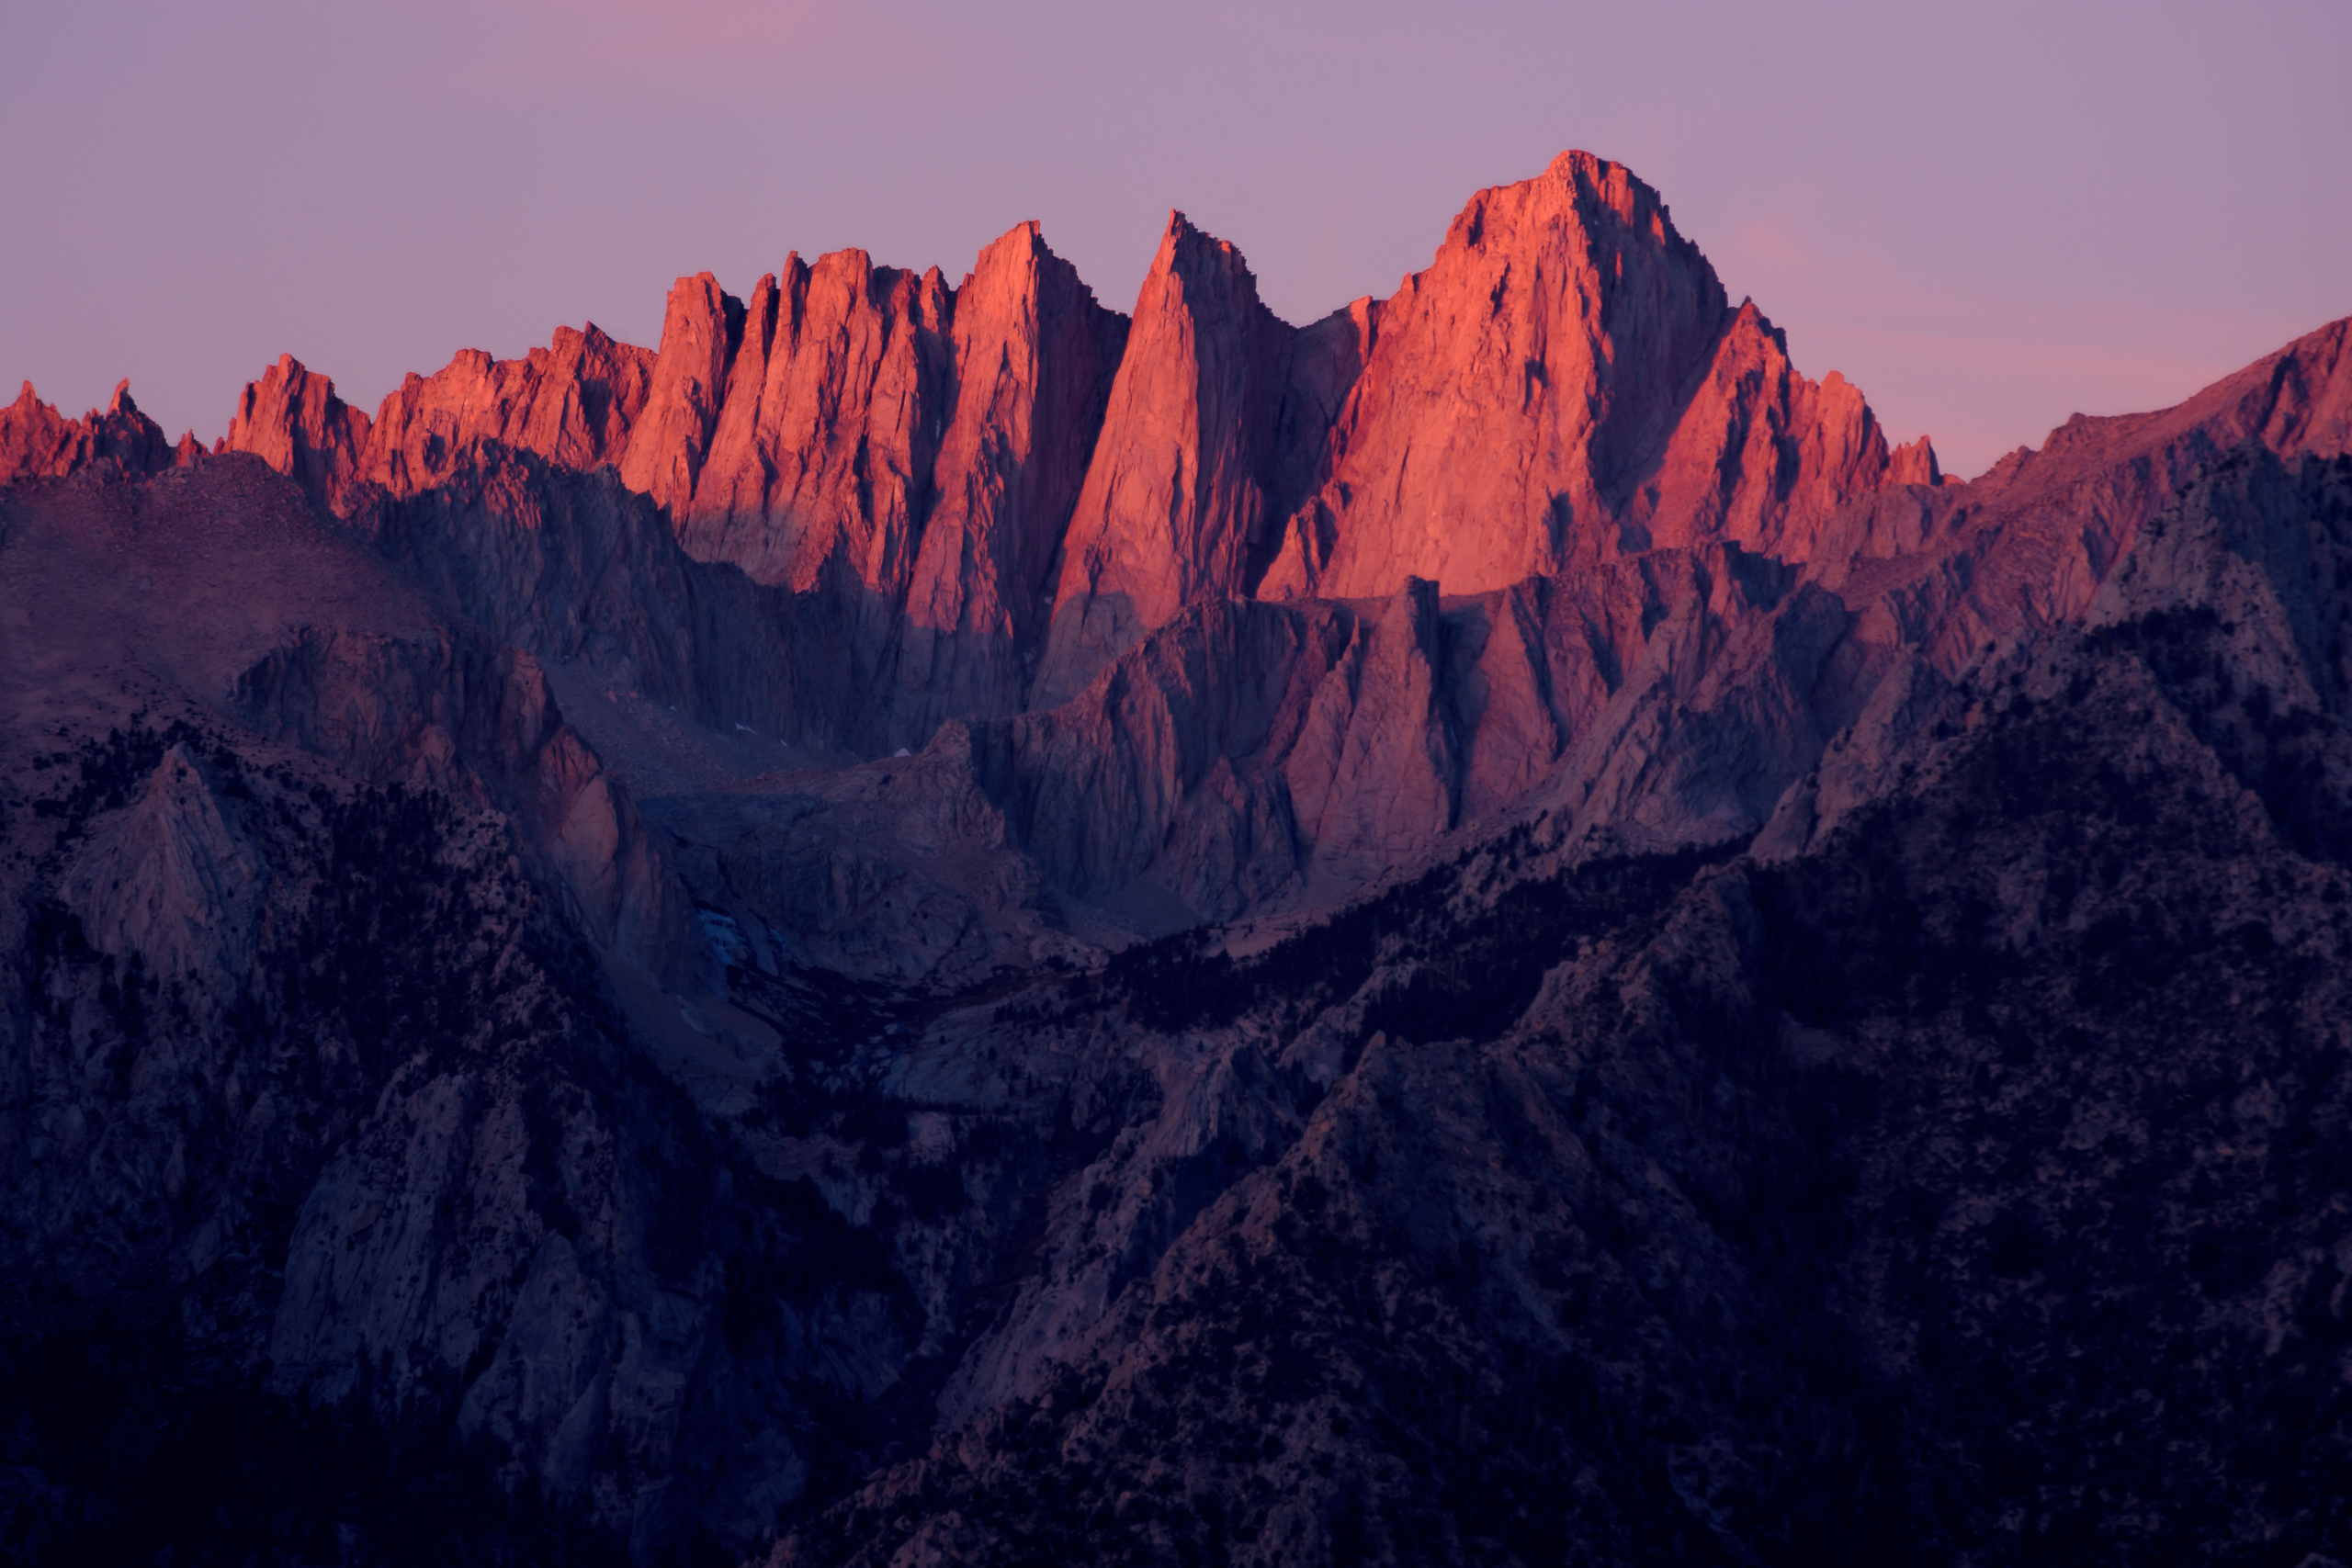 Mount Whitney in Sequoia National Park. Whiteny has the highest summit in the contiguous 48 states at 14,505 feet. October 22, 2016